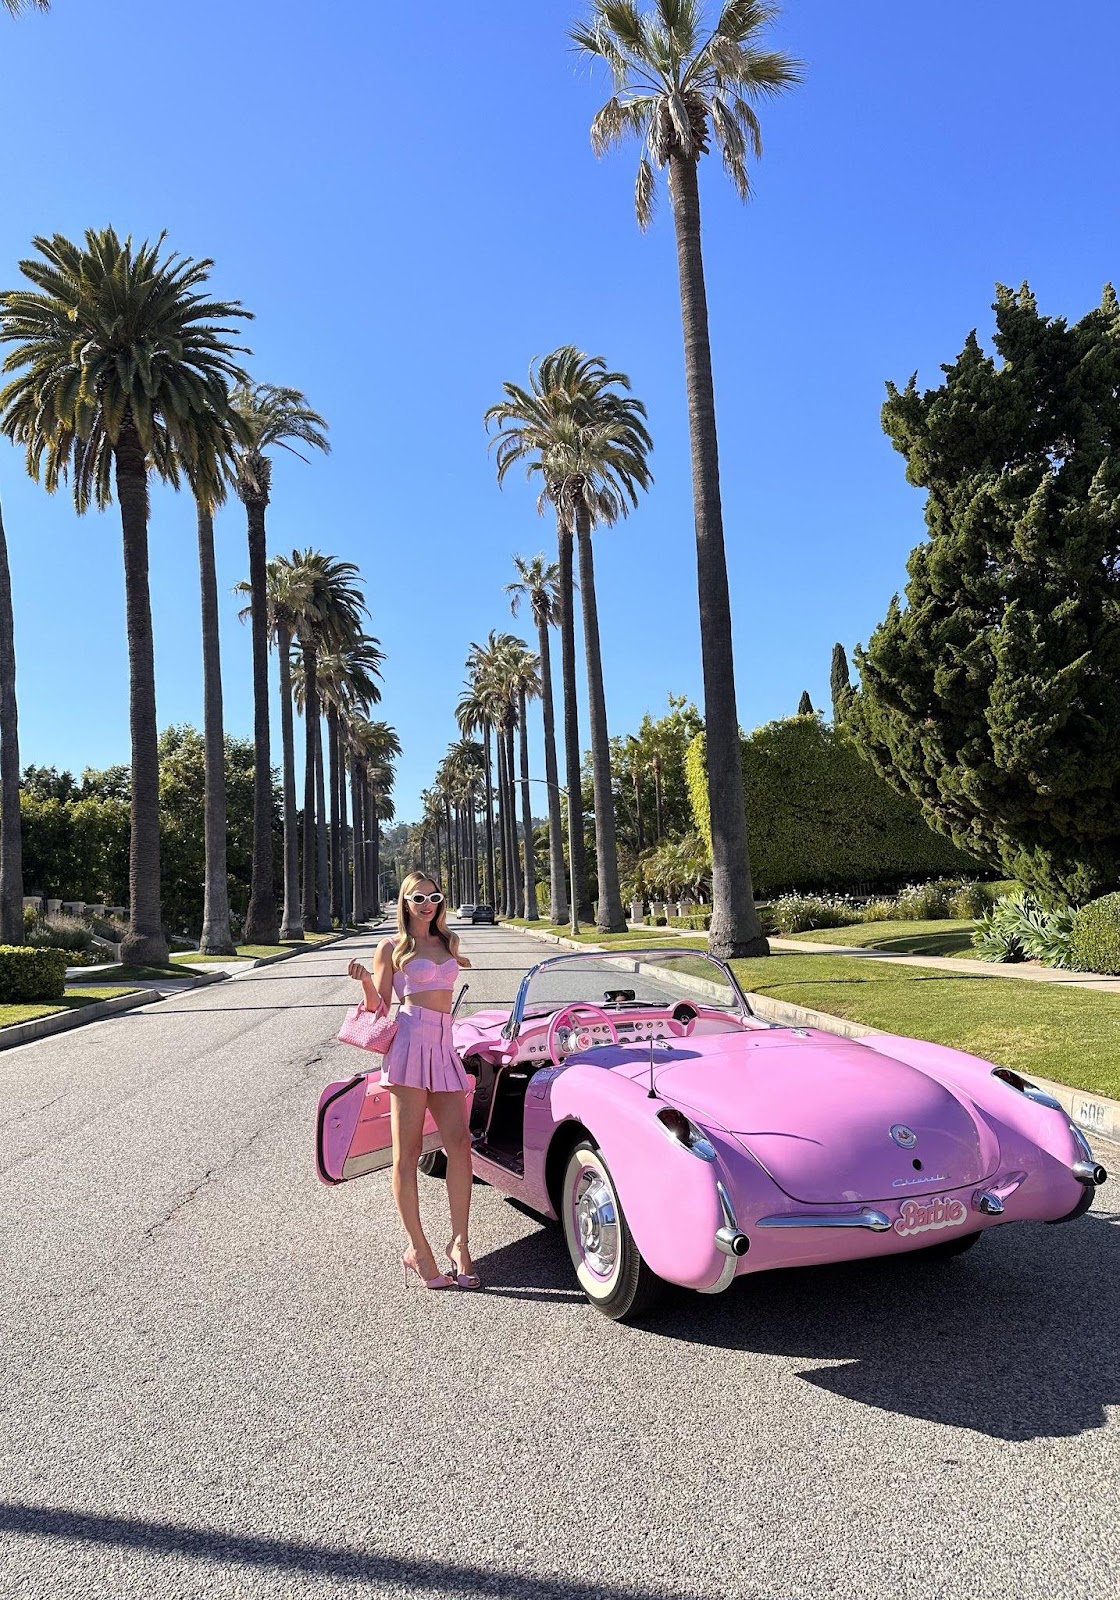 Margot Robbie standing beside a pink convertible in a palm-tree-lined Hollywood street.